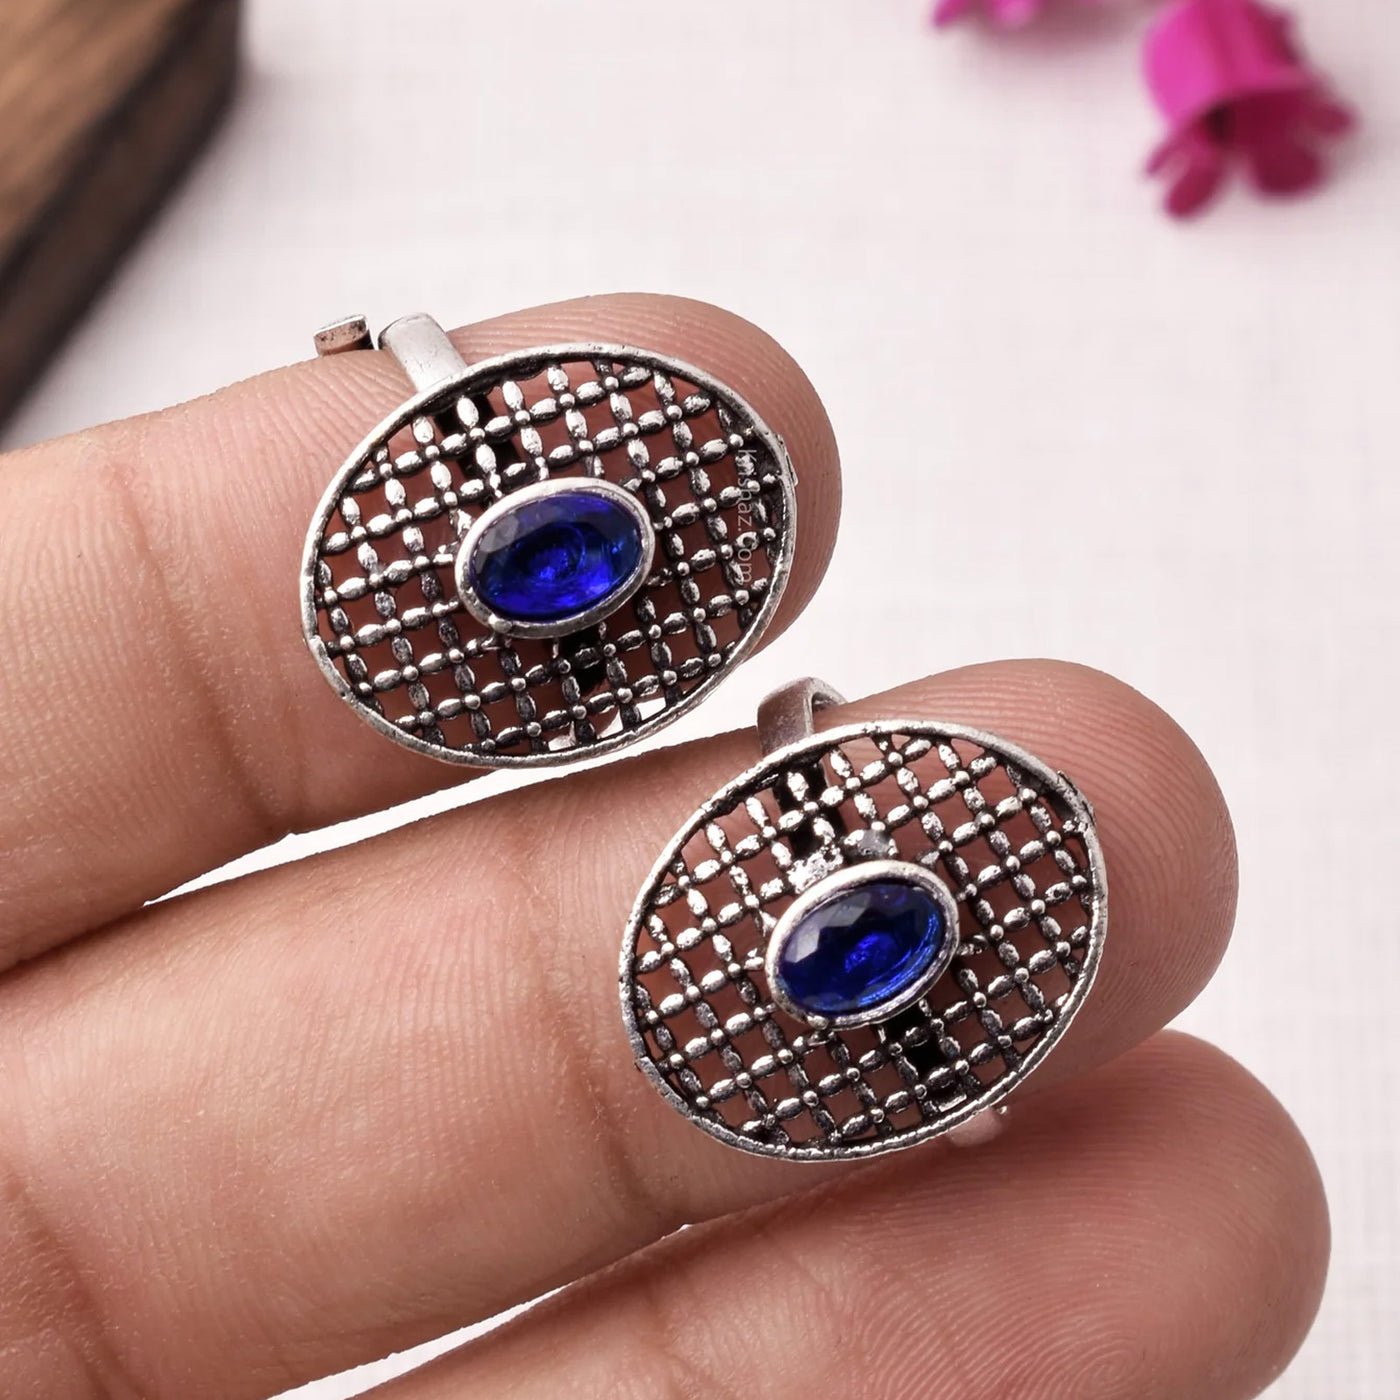 A Pair of Blue Color Oxidized Silver Adjustable Ethnic Toe Rings